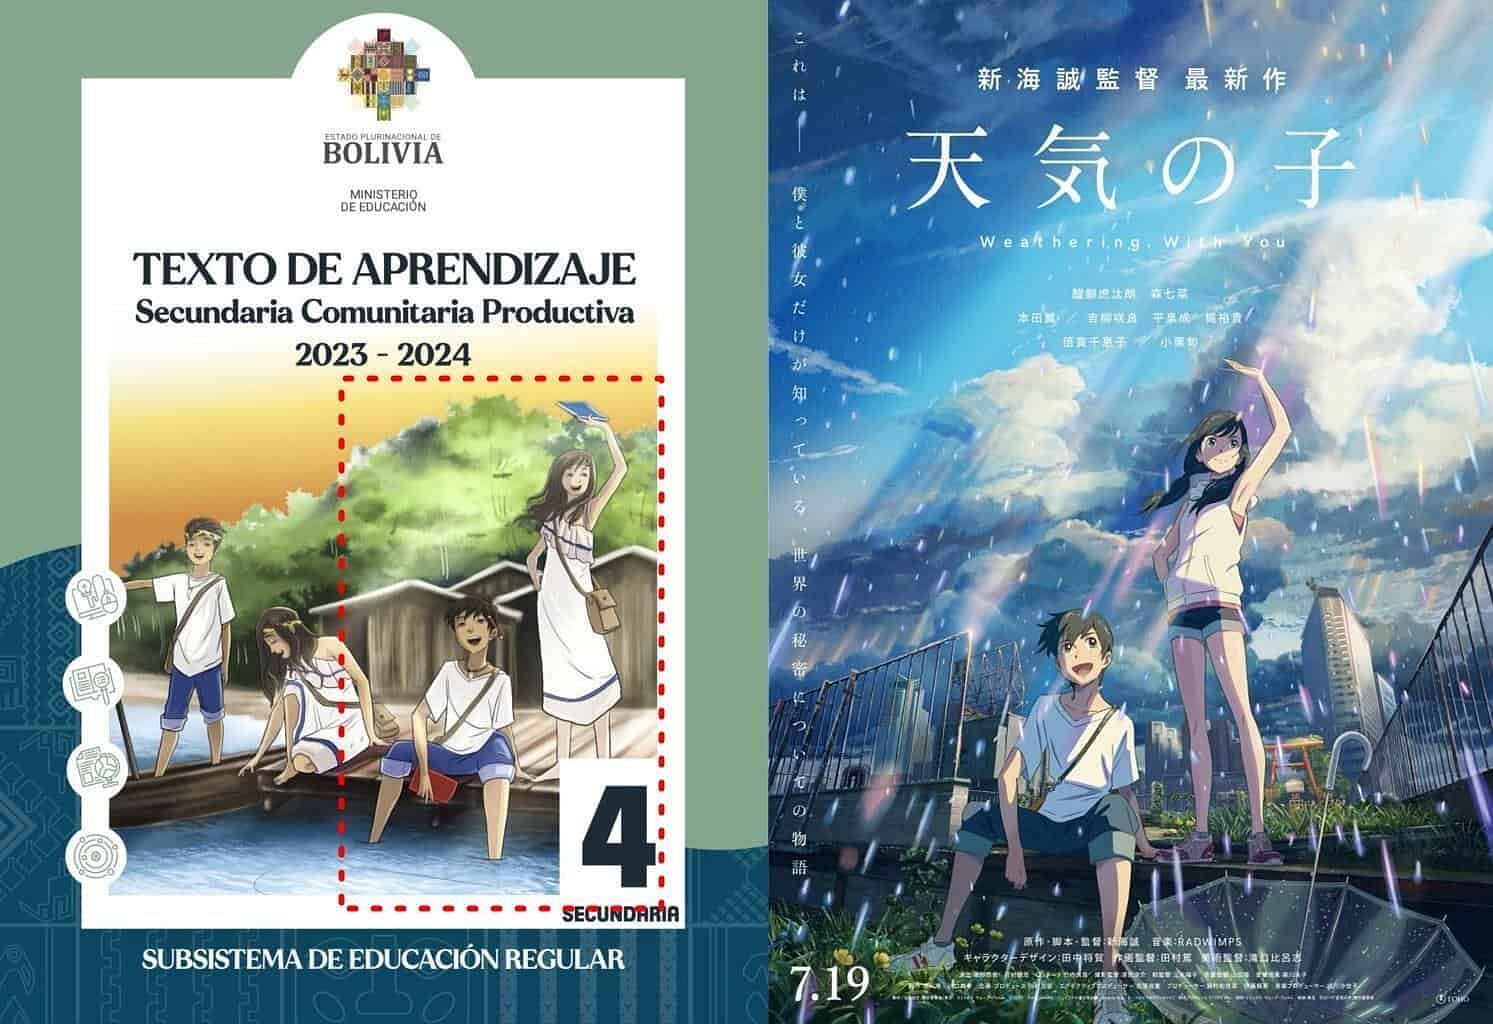 4th grade textbook in Bolivia that plagiarized the key visual from Weathering With You (Image via Bolivian Ministry of Education, Makoto Shinkai)